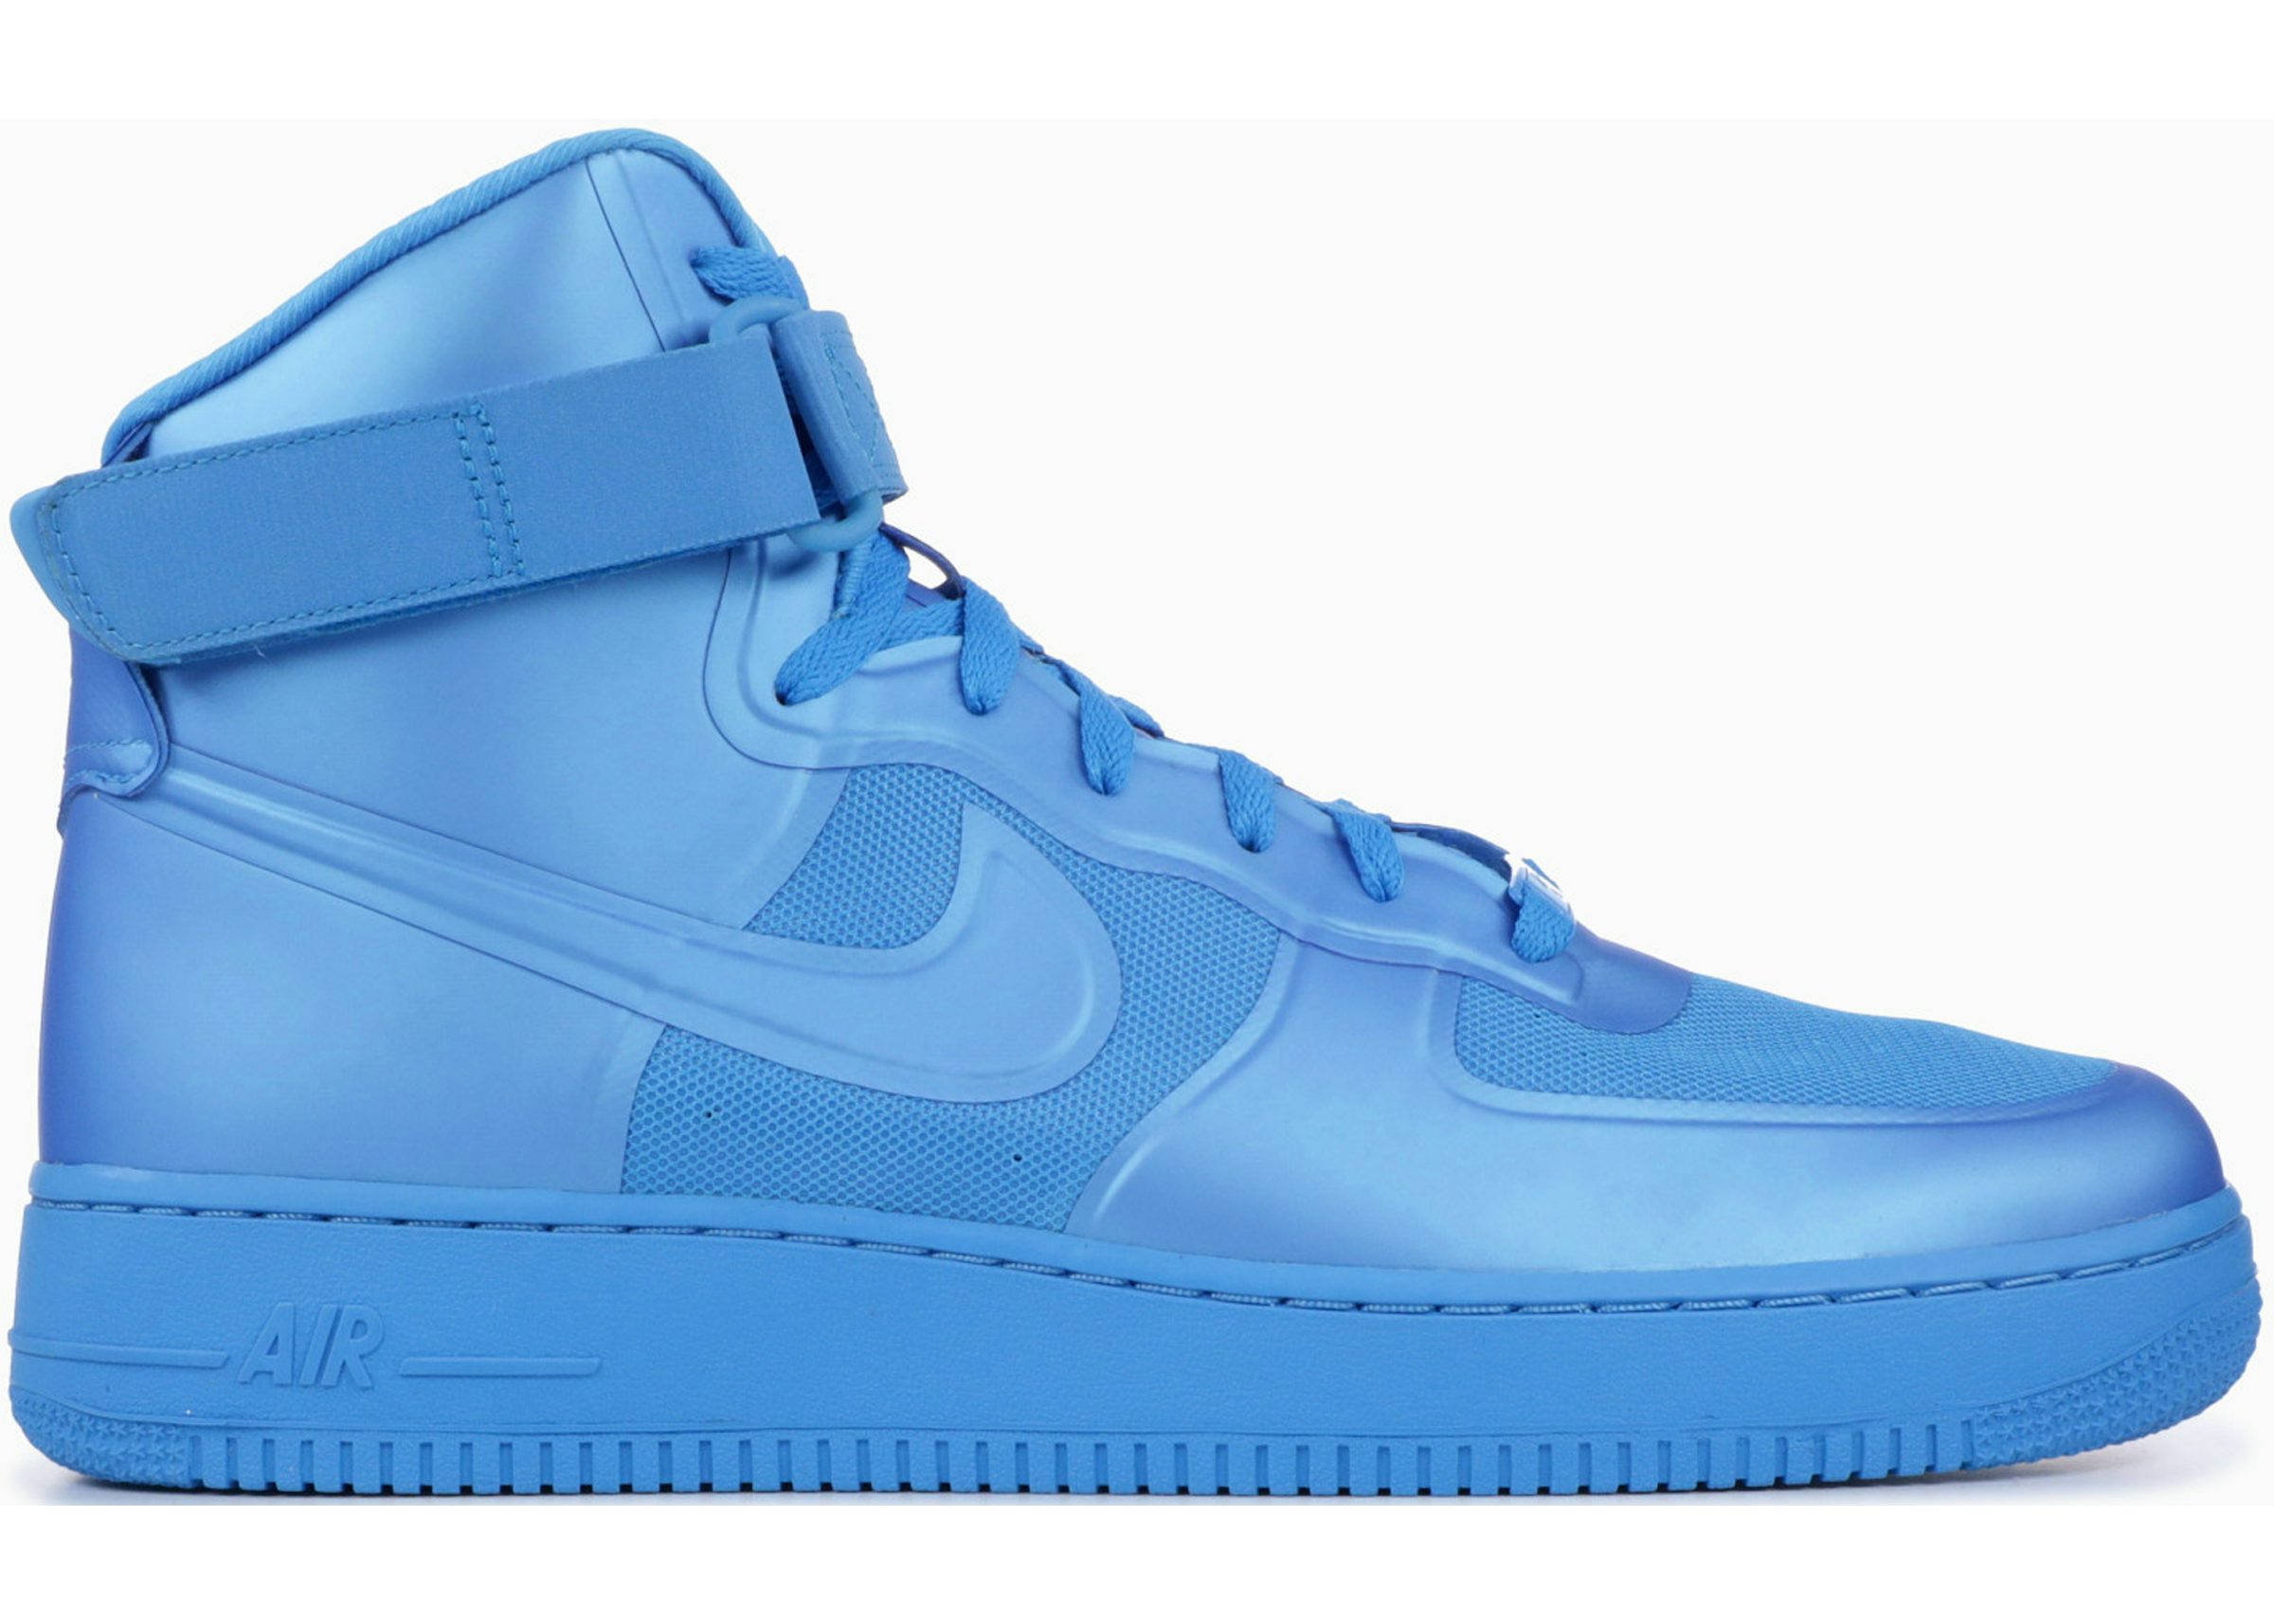 Nike Air Force 1 High Hyperfuse Blue Glow Men's - 454433-400 - US